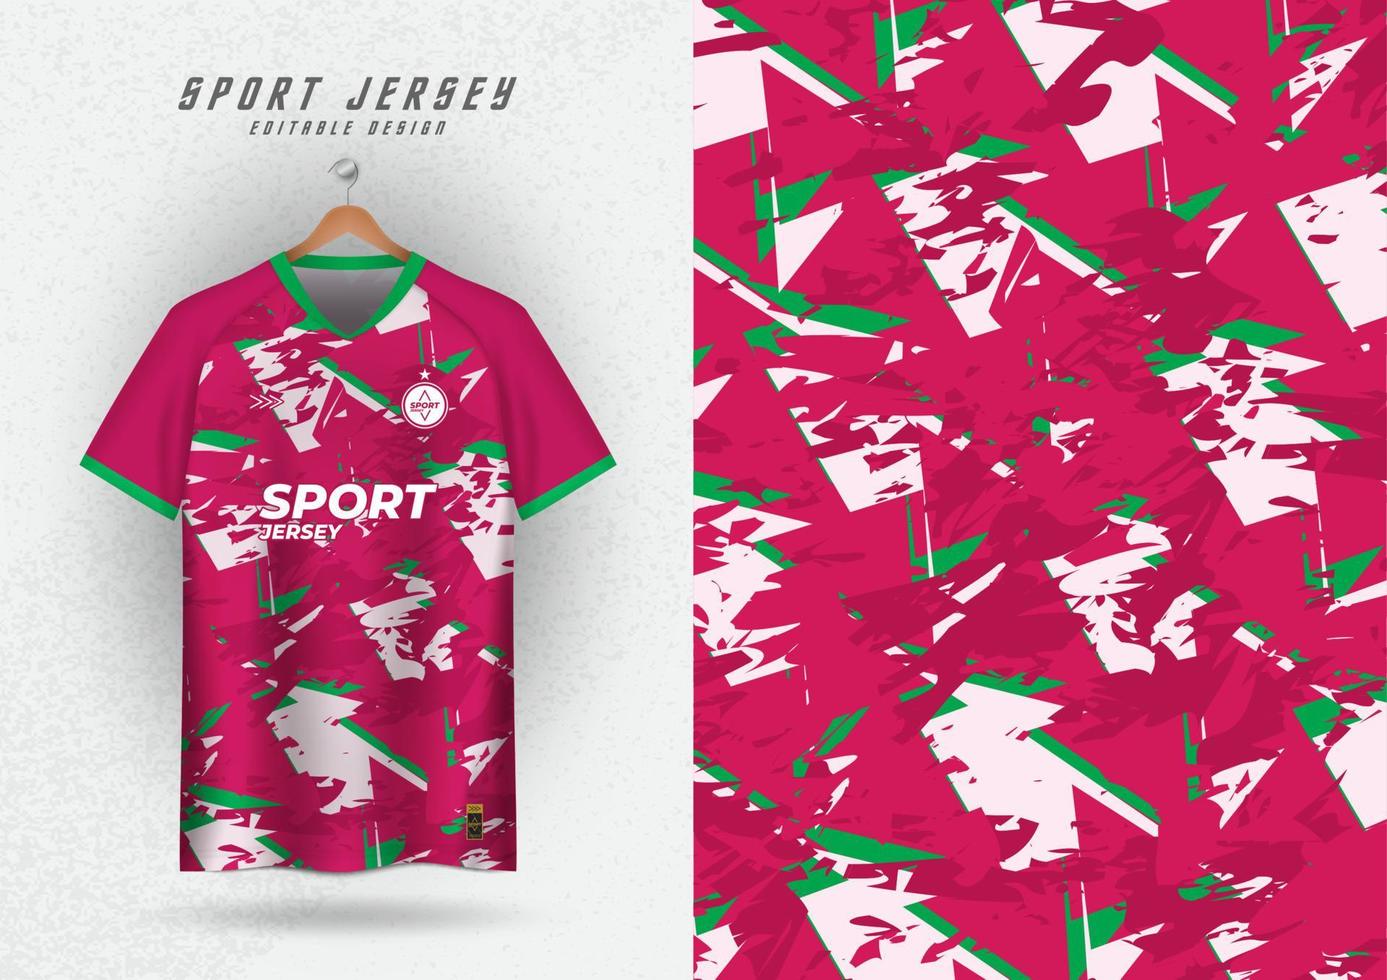 background for sports jersey soccer jersey running jersey racing jersey pattern pink vector